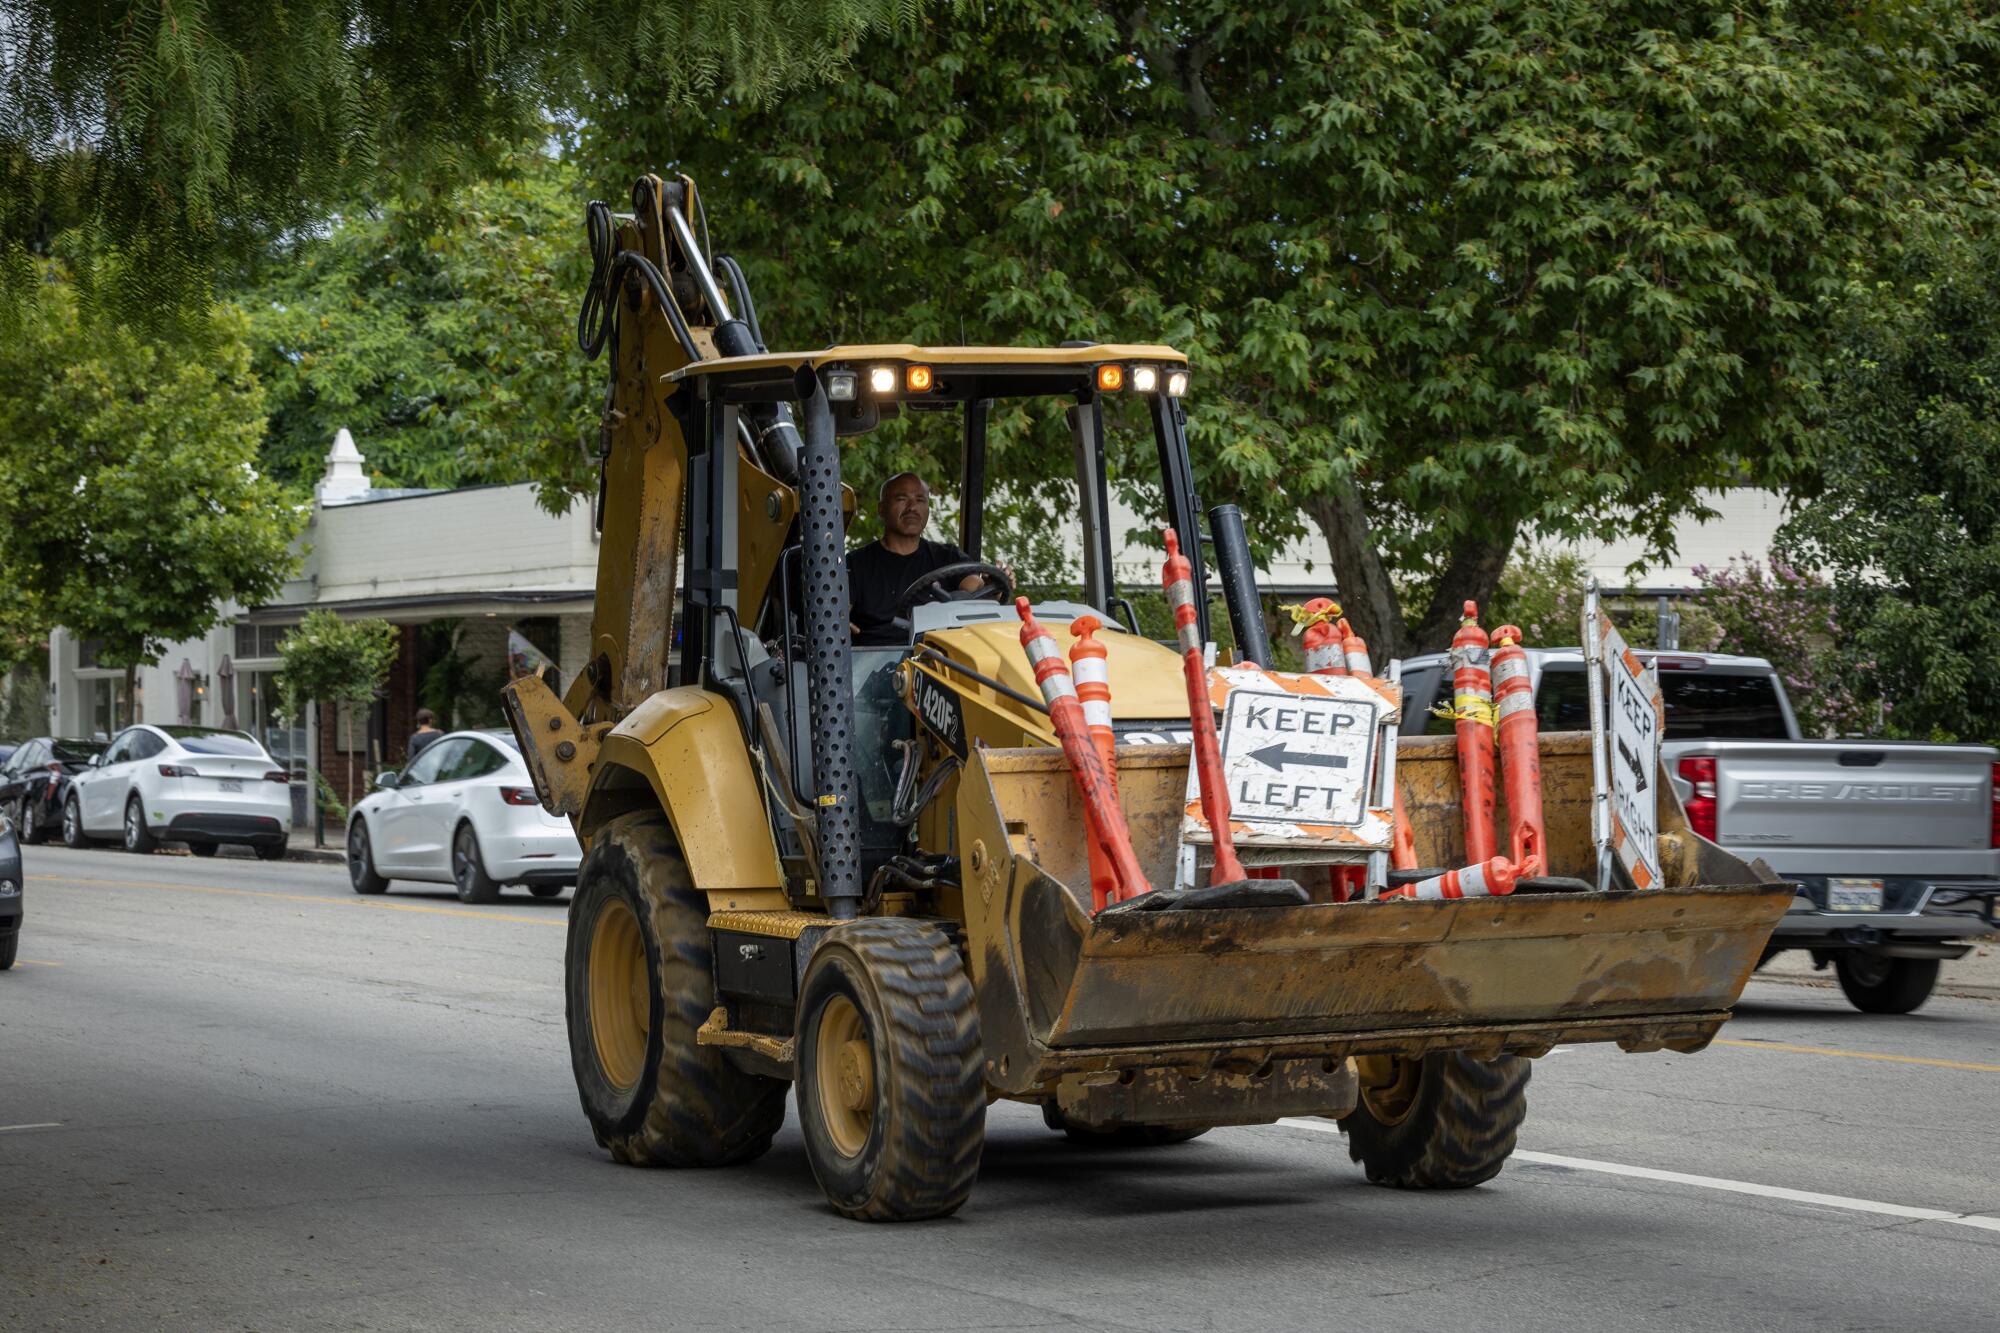 A backhoe loader carrying orange pylons and a keep-left sign drives down a tree-lined street.